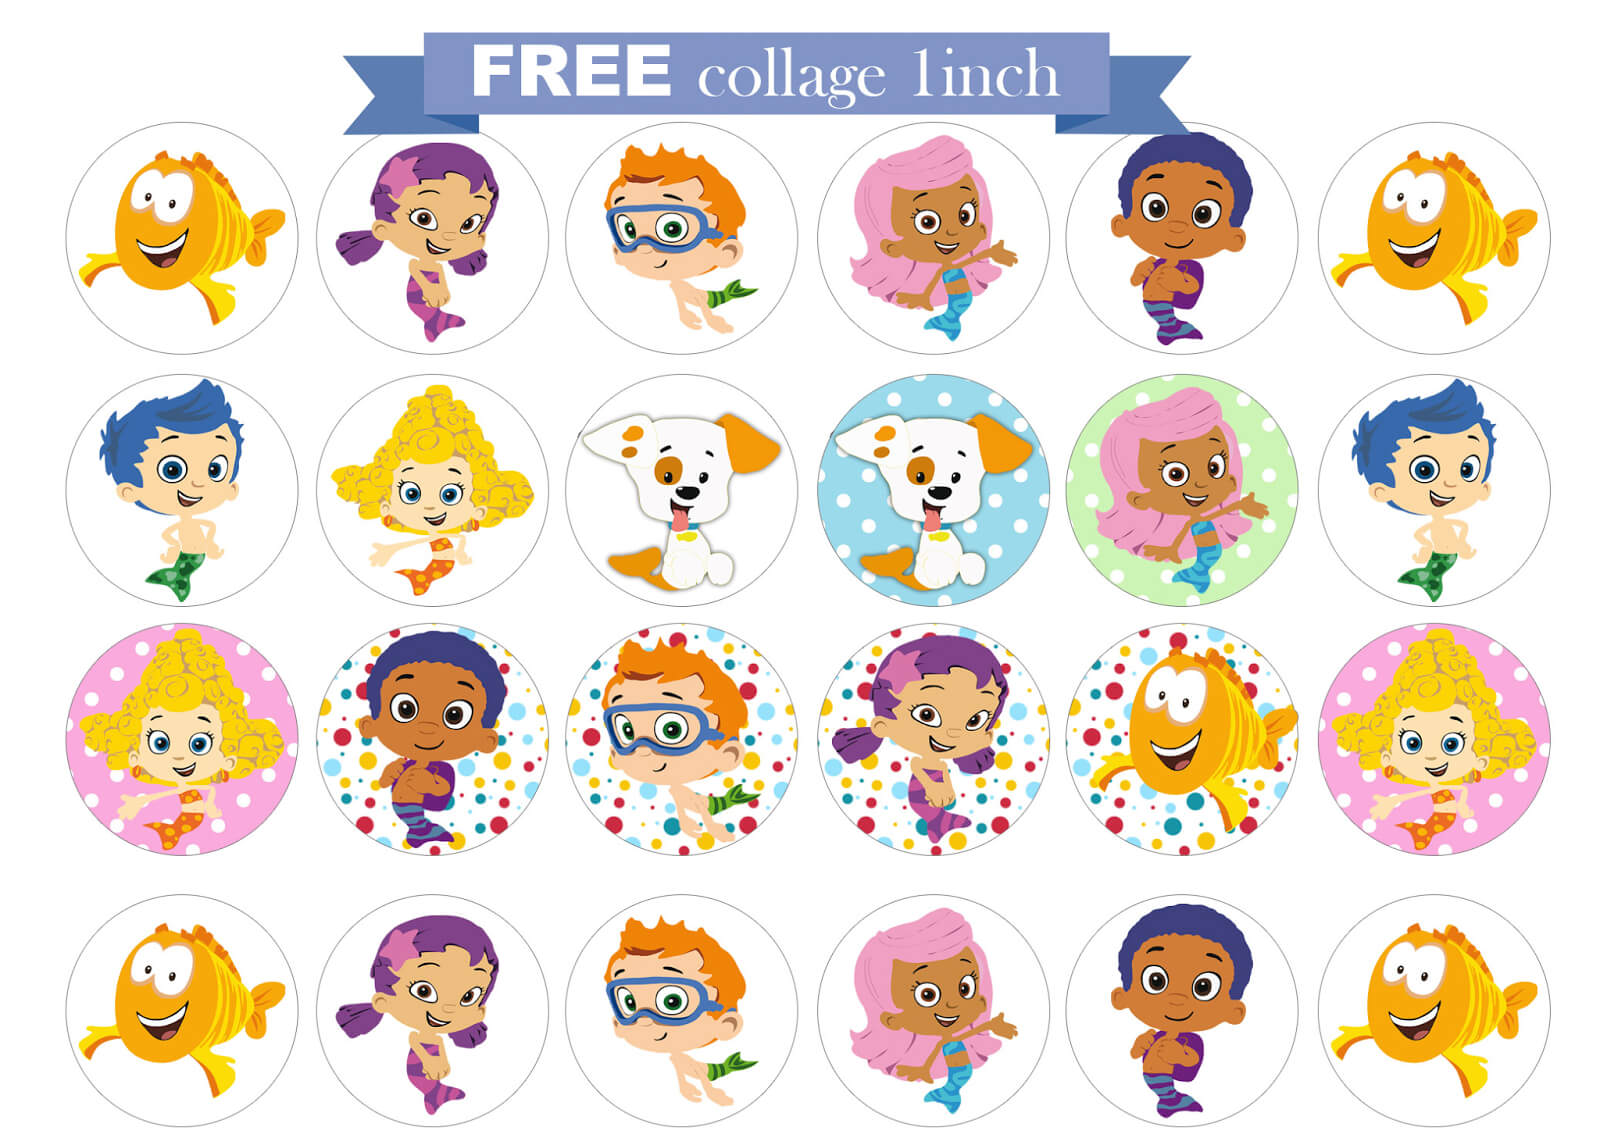 Bubble Guppies Birthday Banner Template – Atlantaauctionco For Bubble Guppies Birthday Banner Template